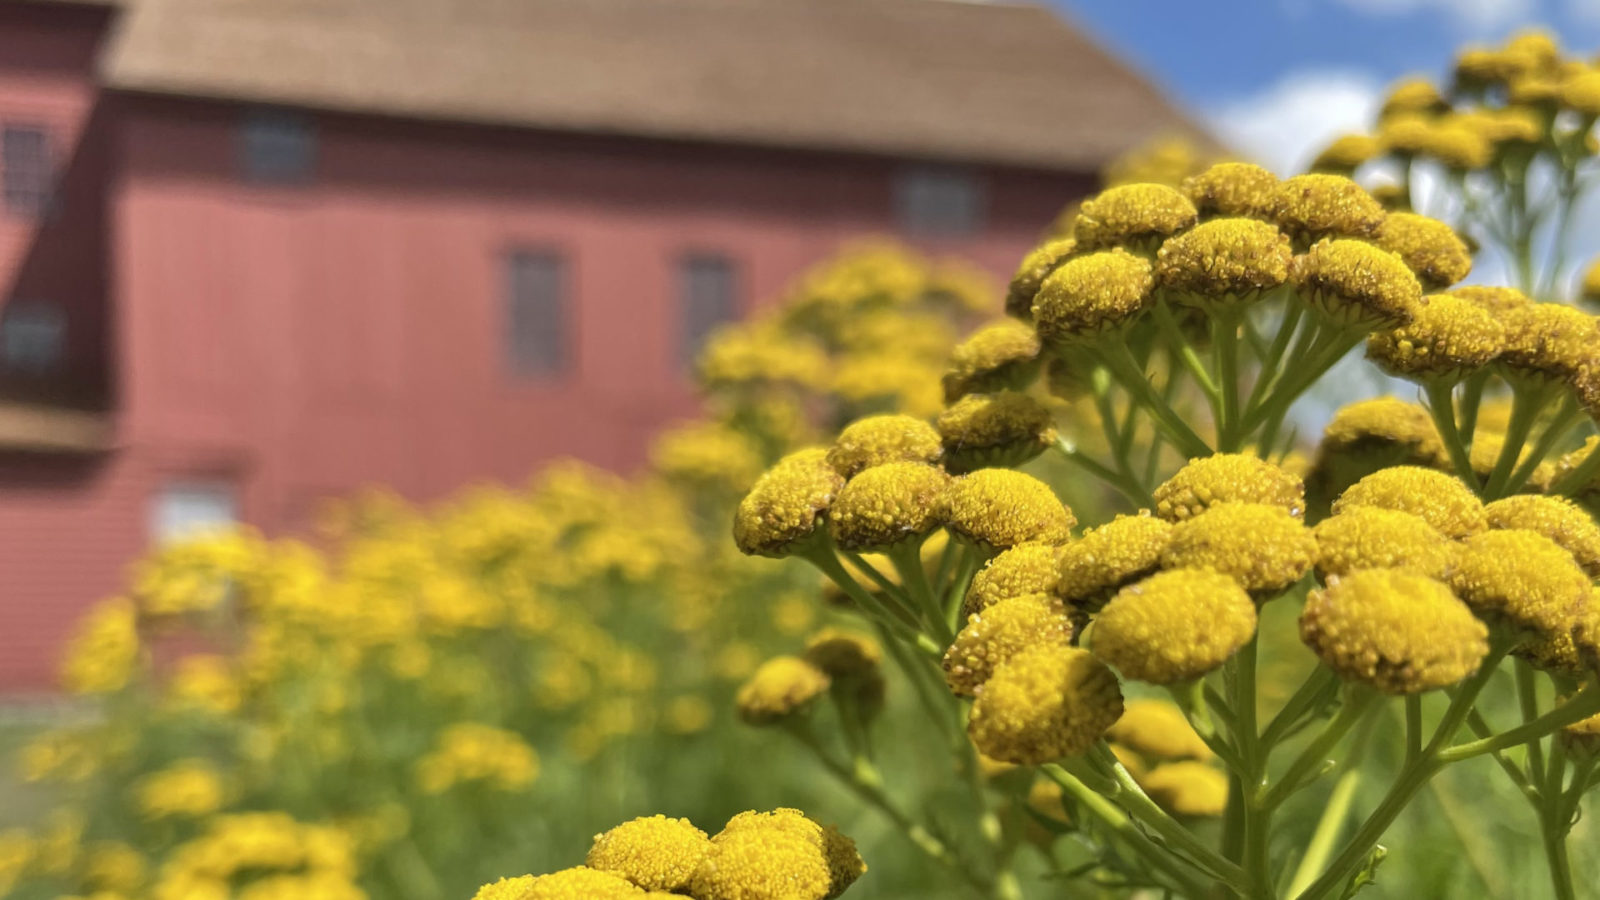 Tansy blooms golden at Hancock Shaker Village in August.